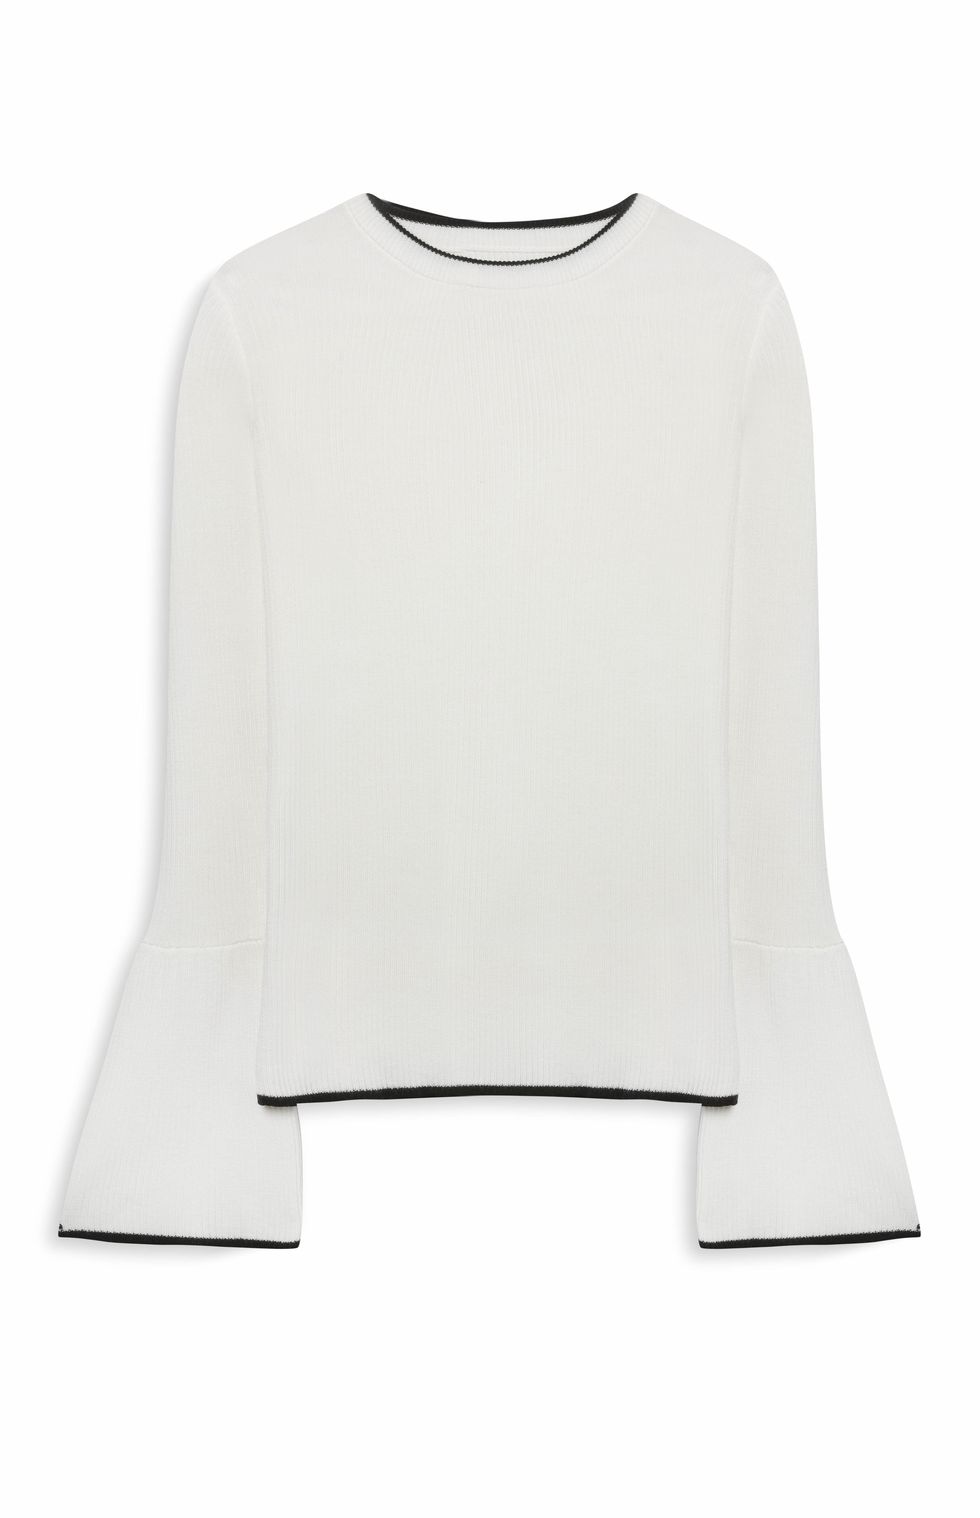 Clothing, White, Sleeve, Neck, T-shirt, Shoulder, Blouse, Top, Crop top, Outerwear, 